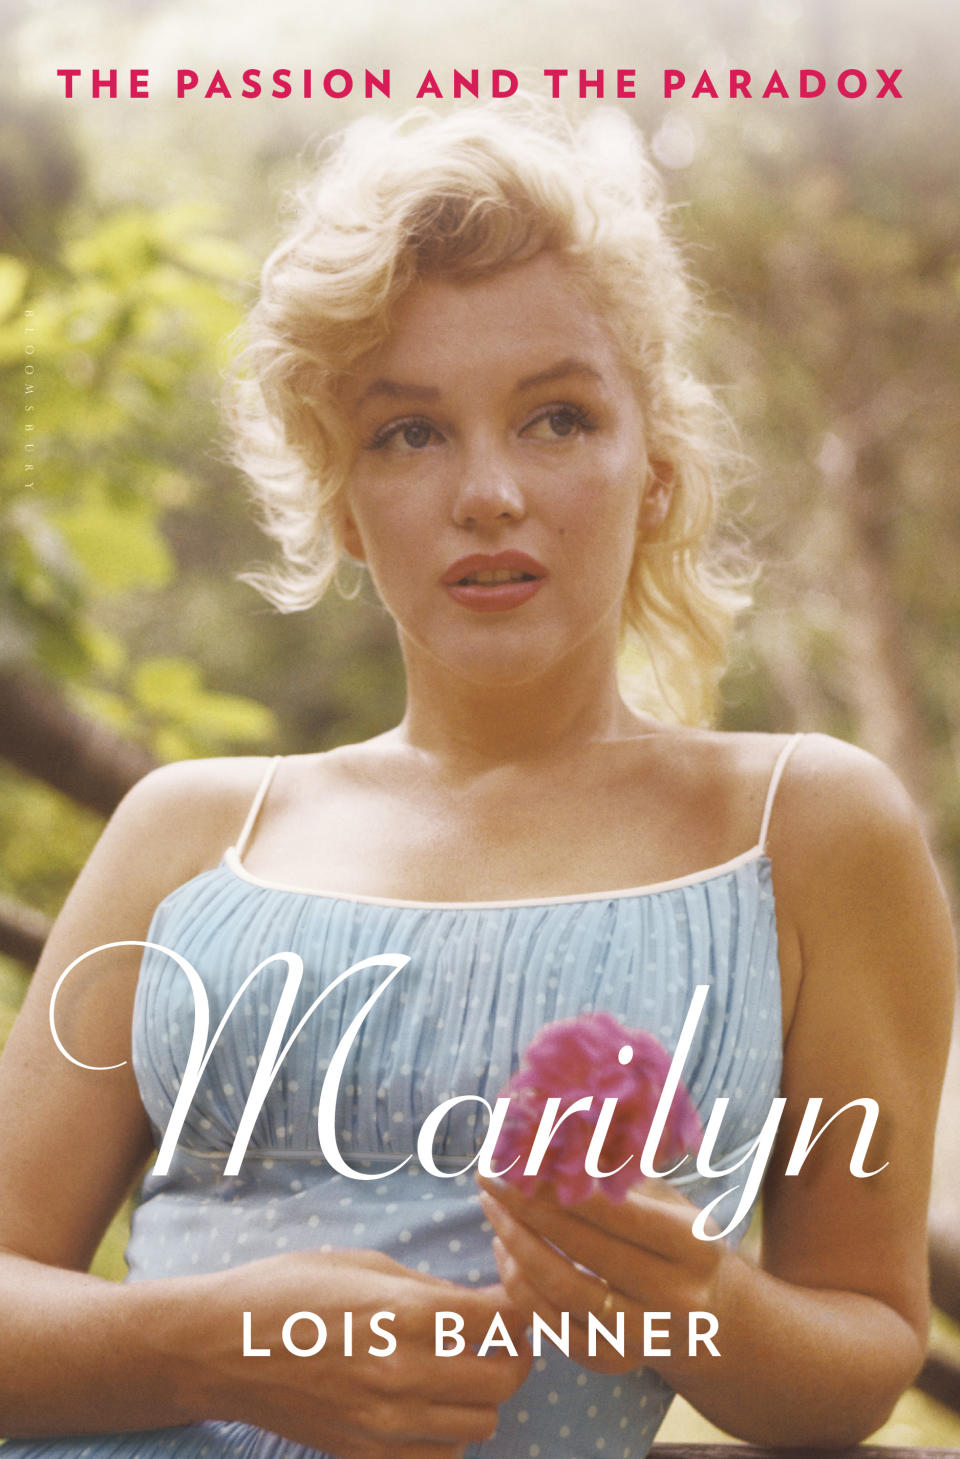 This book cover image released by Bloomsbury USA shows "Marilyn: The Passion and the Paradox," by Lois Banner. (AP Photo/Bloomsbury USA)